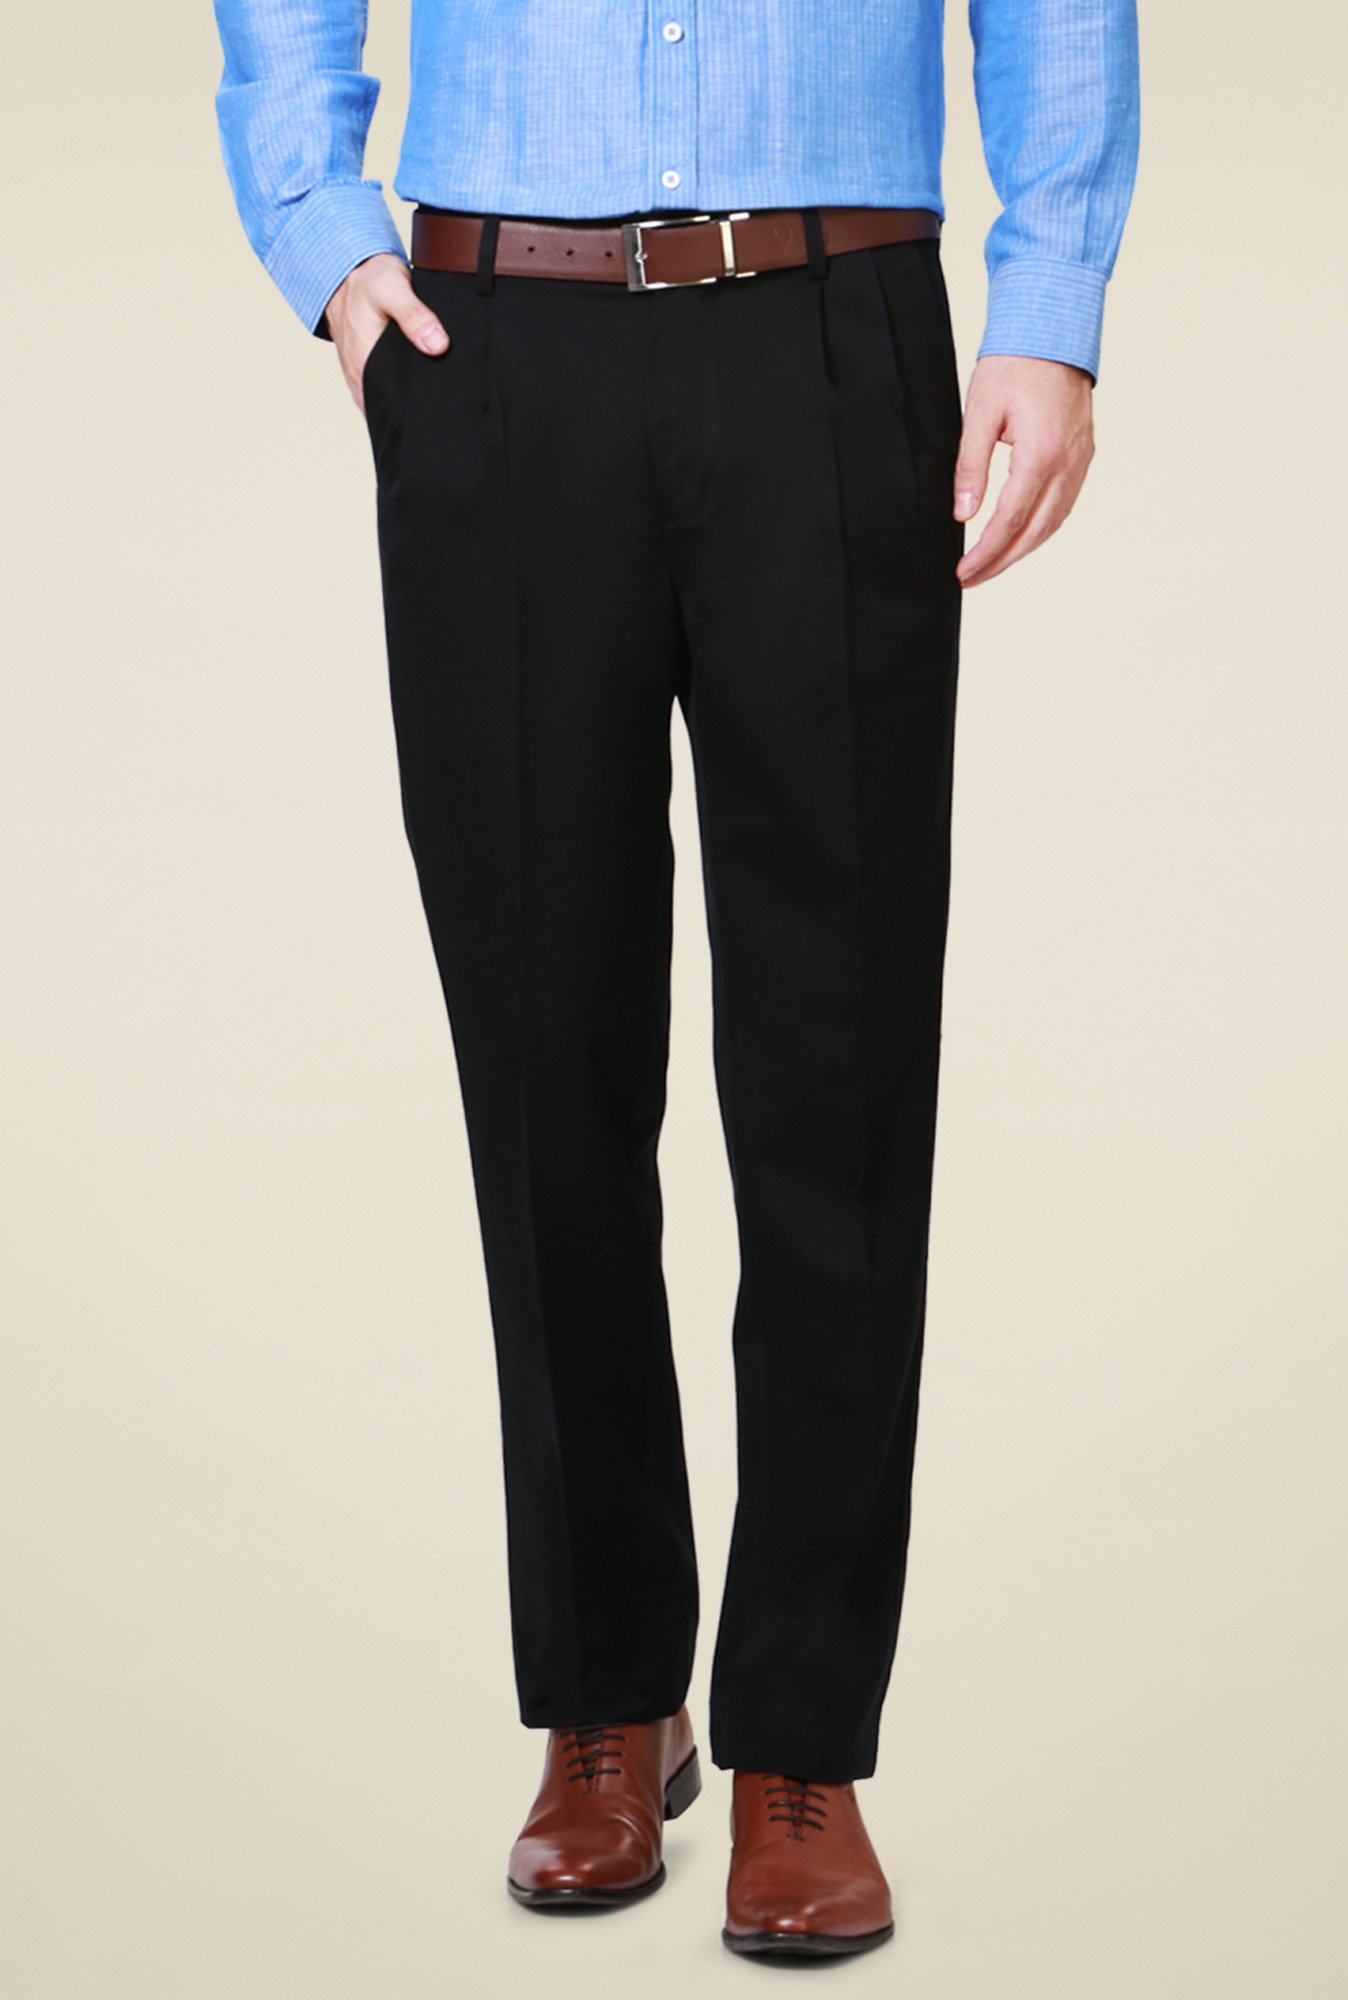 Buy Allen Solly Woman Checked Trousers - Trousers for Women 21266692 |  Myntra